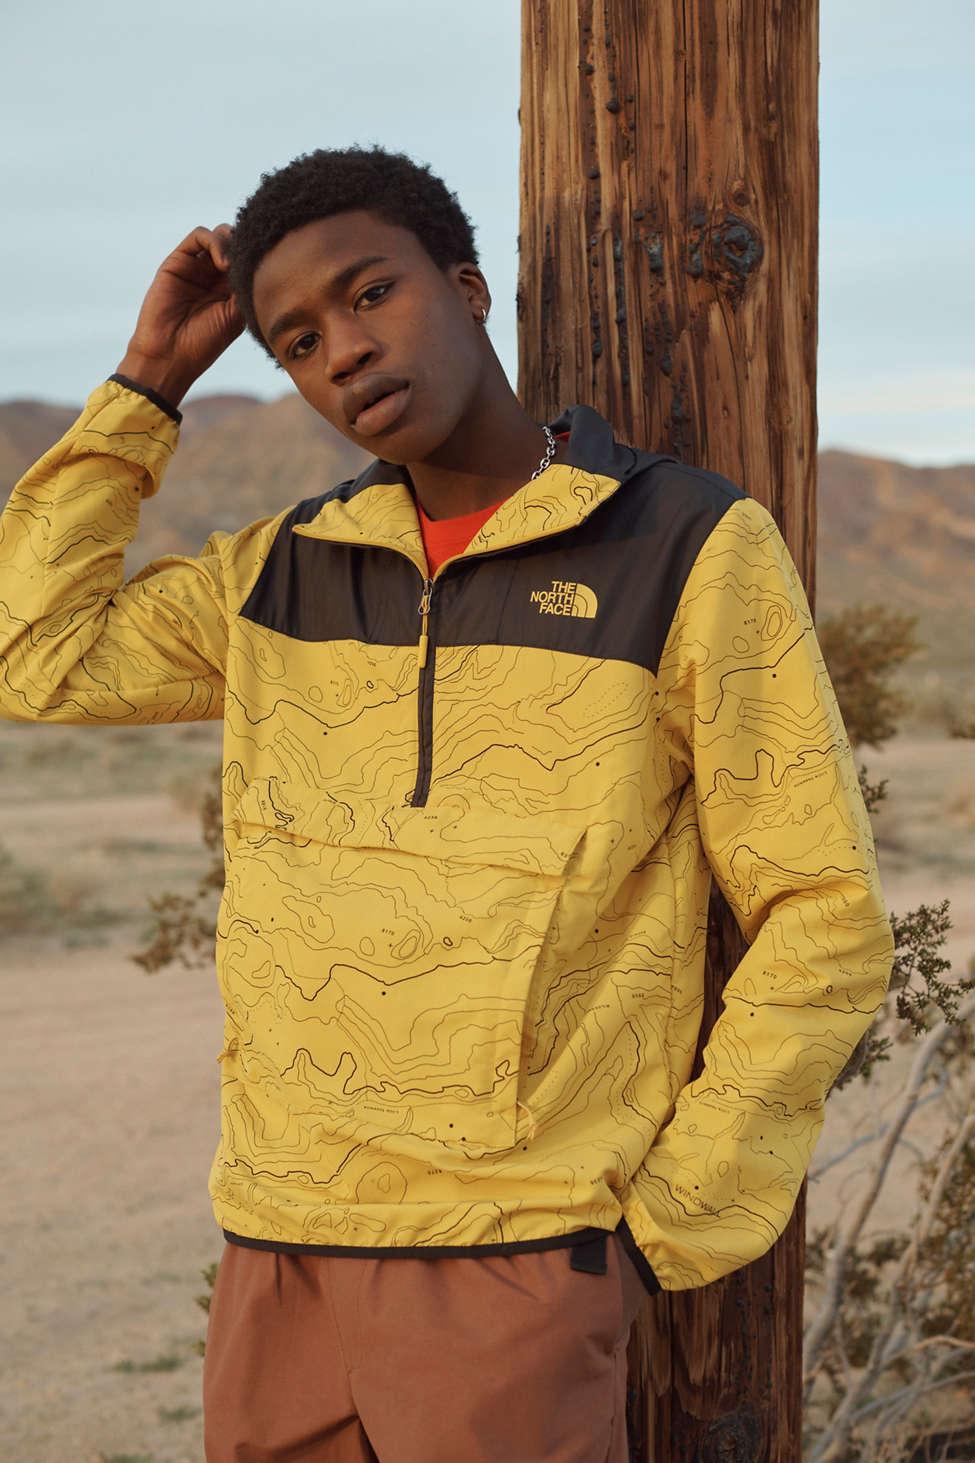 The North Face The North Face Uo Exclusive Topography Fanorak Jacket in  Yellow for Men - Lyst